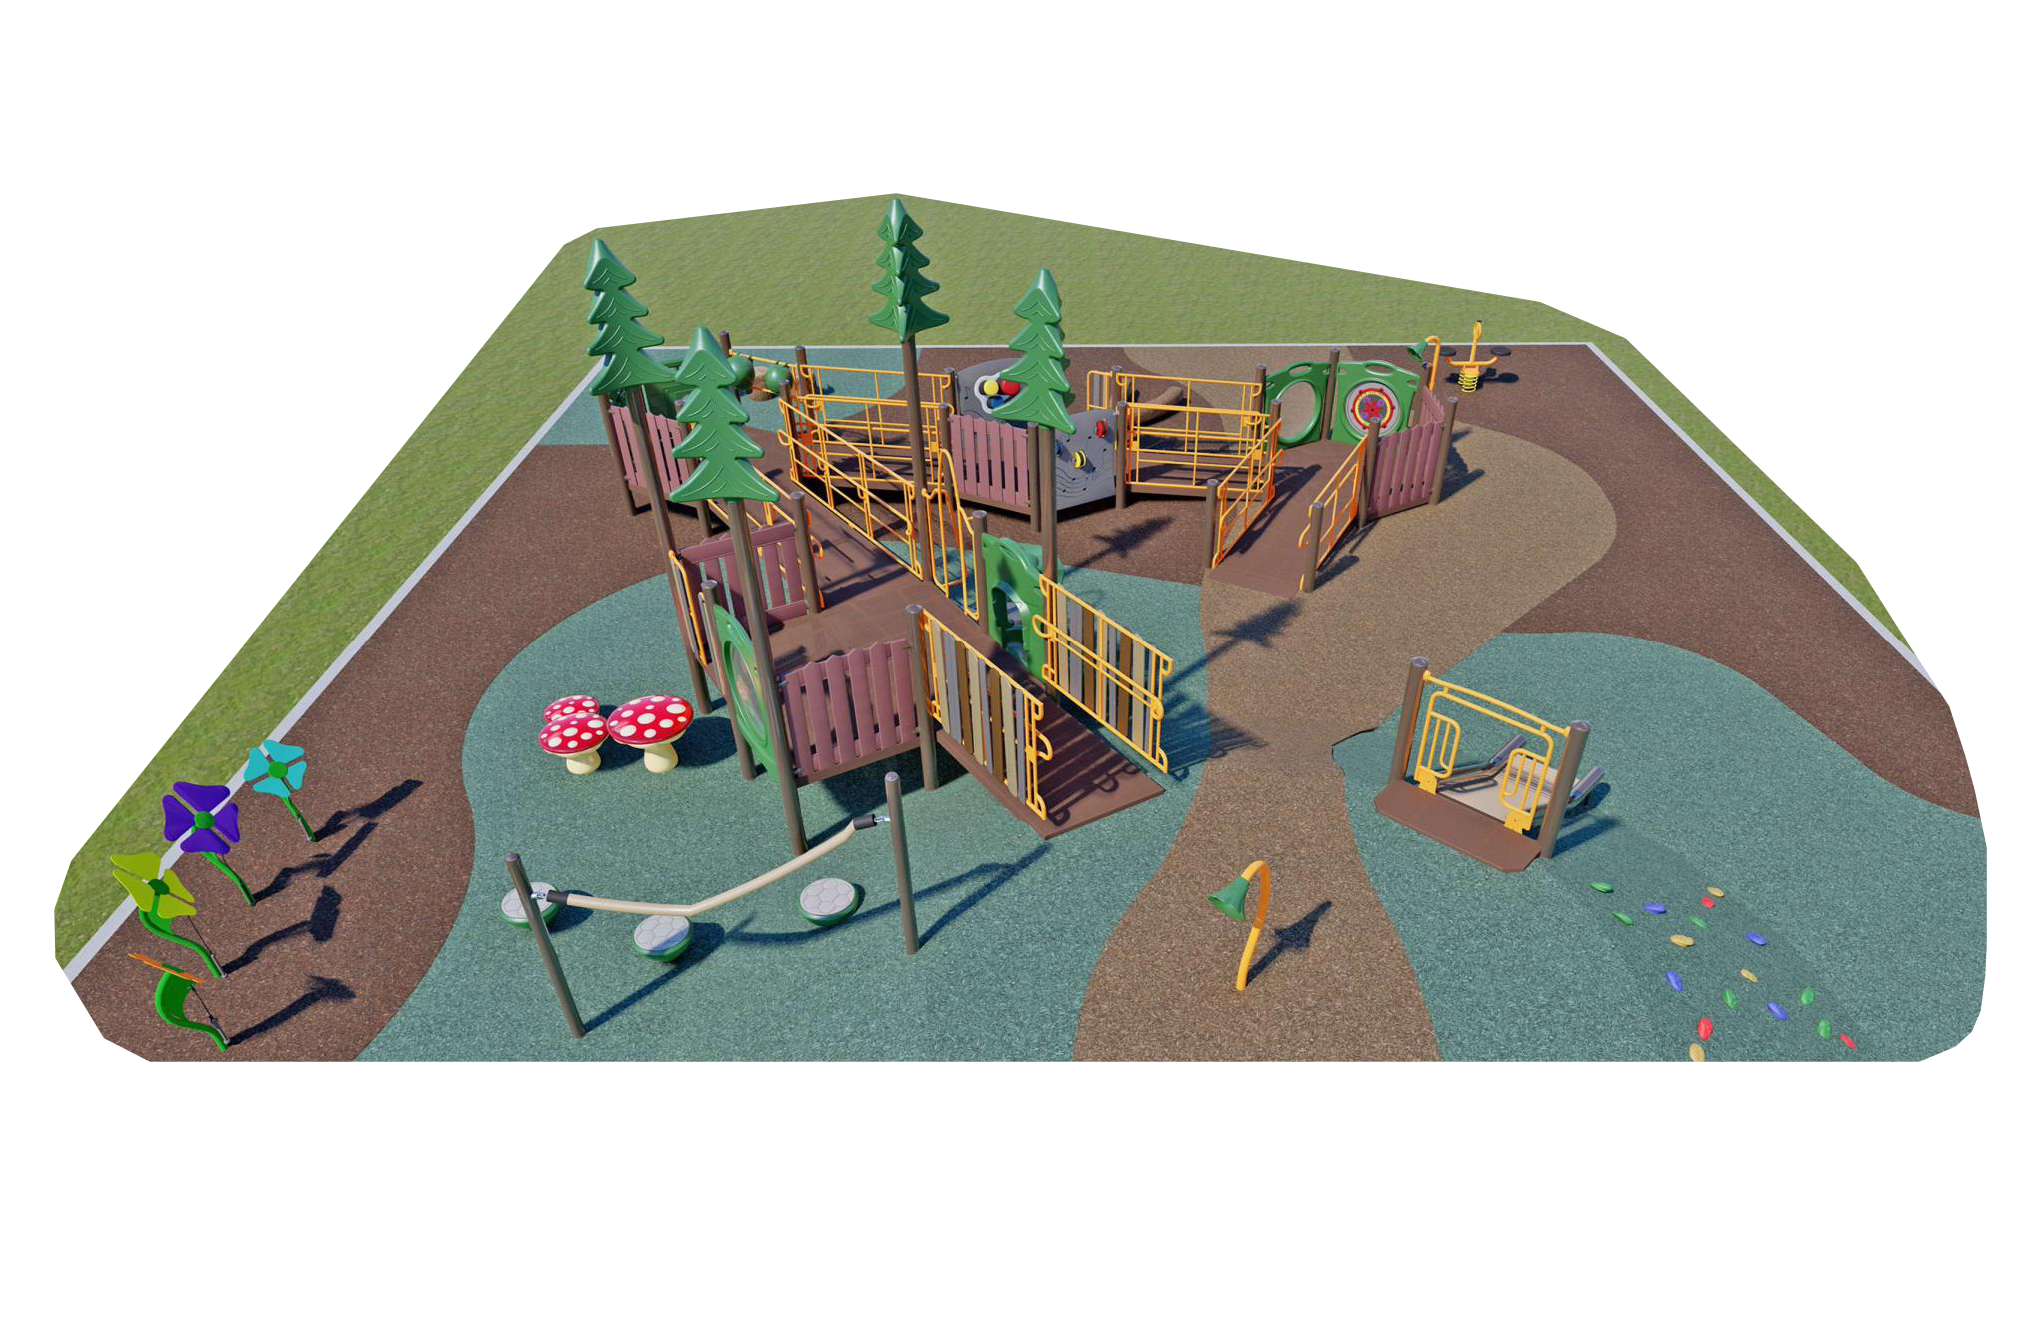 rendering of a playground